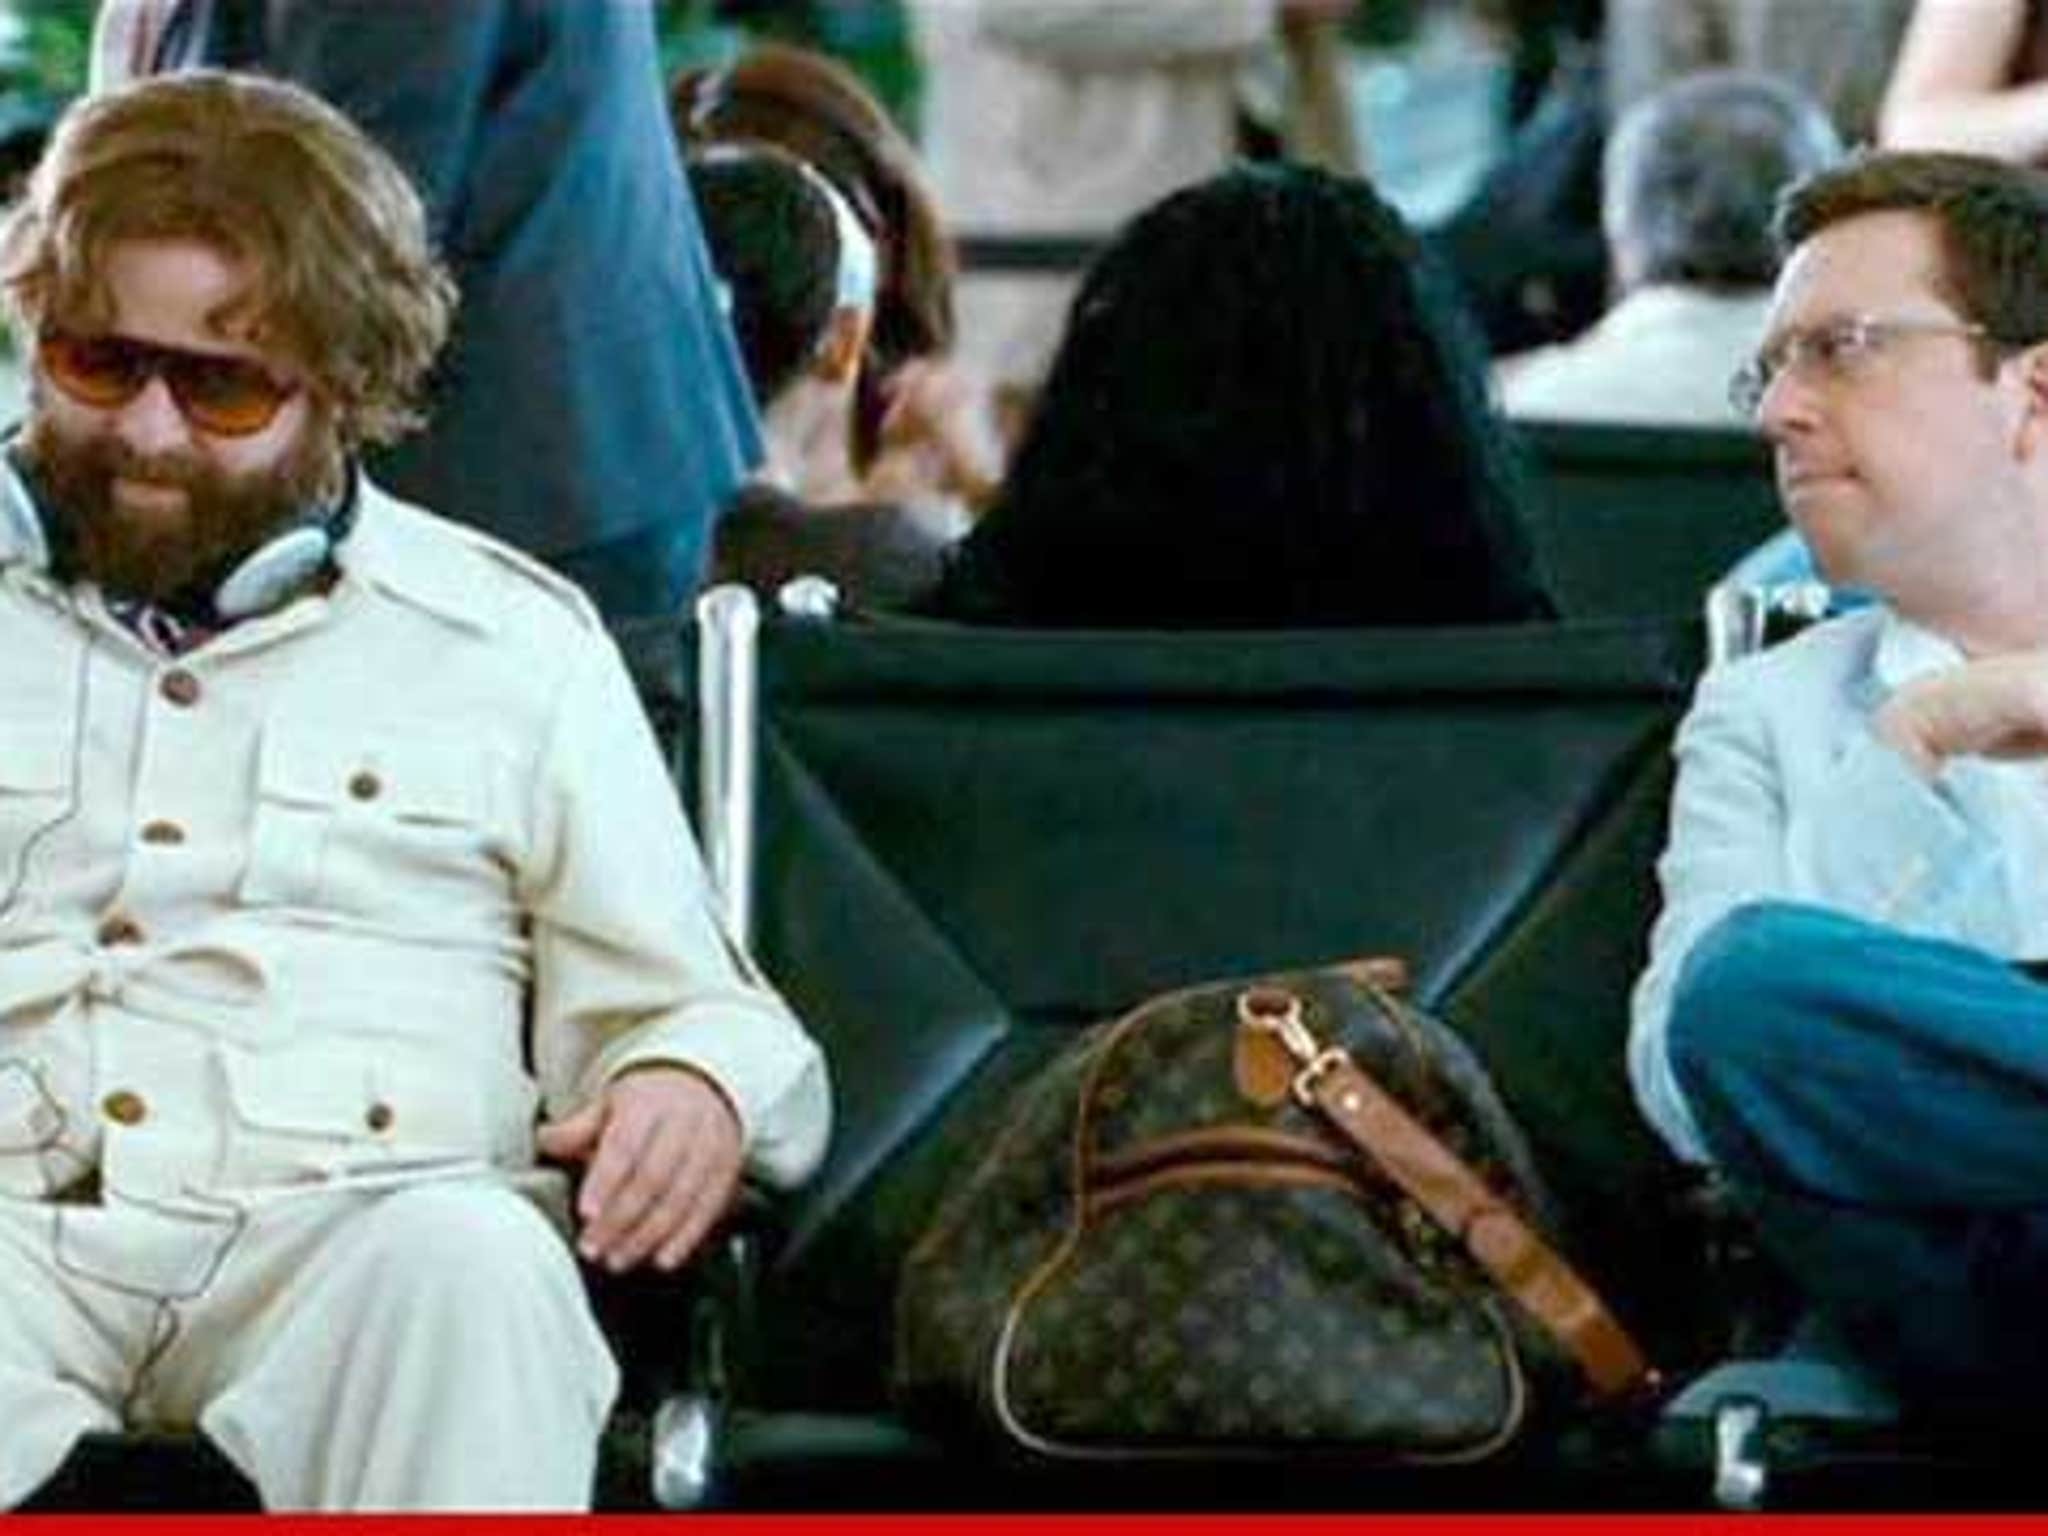 Louis Vuitton goes to court over 'Lewis Vuitton' bag in The Hangover II, Movies